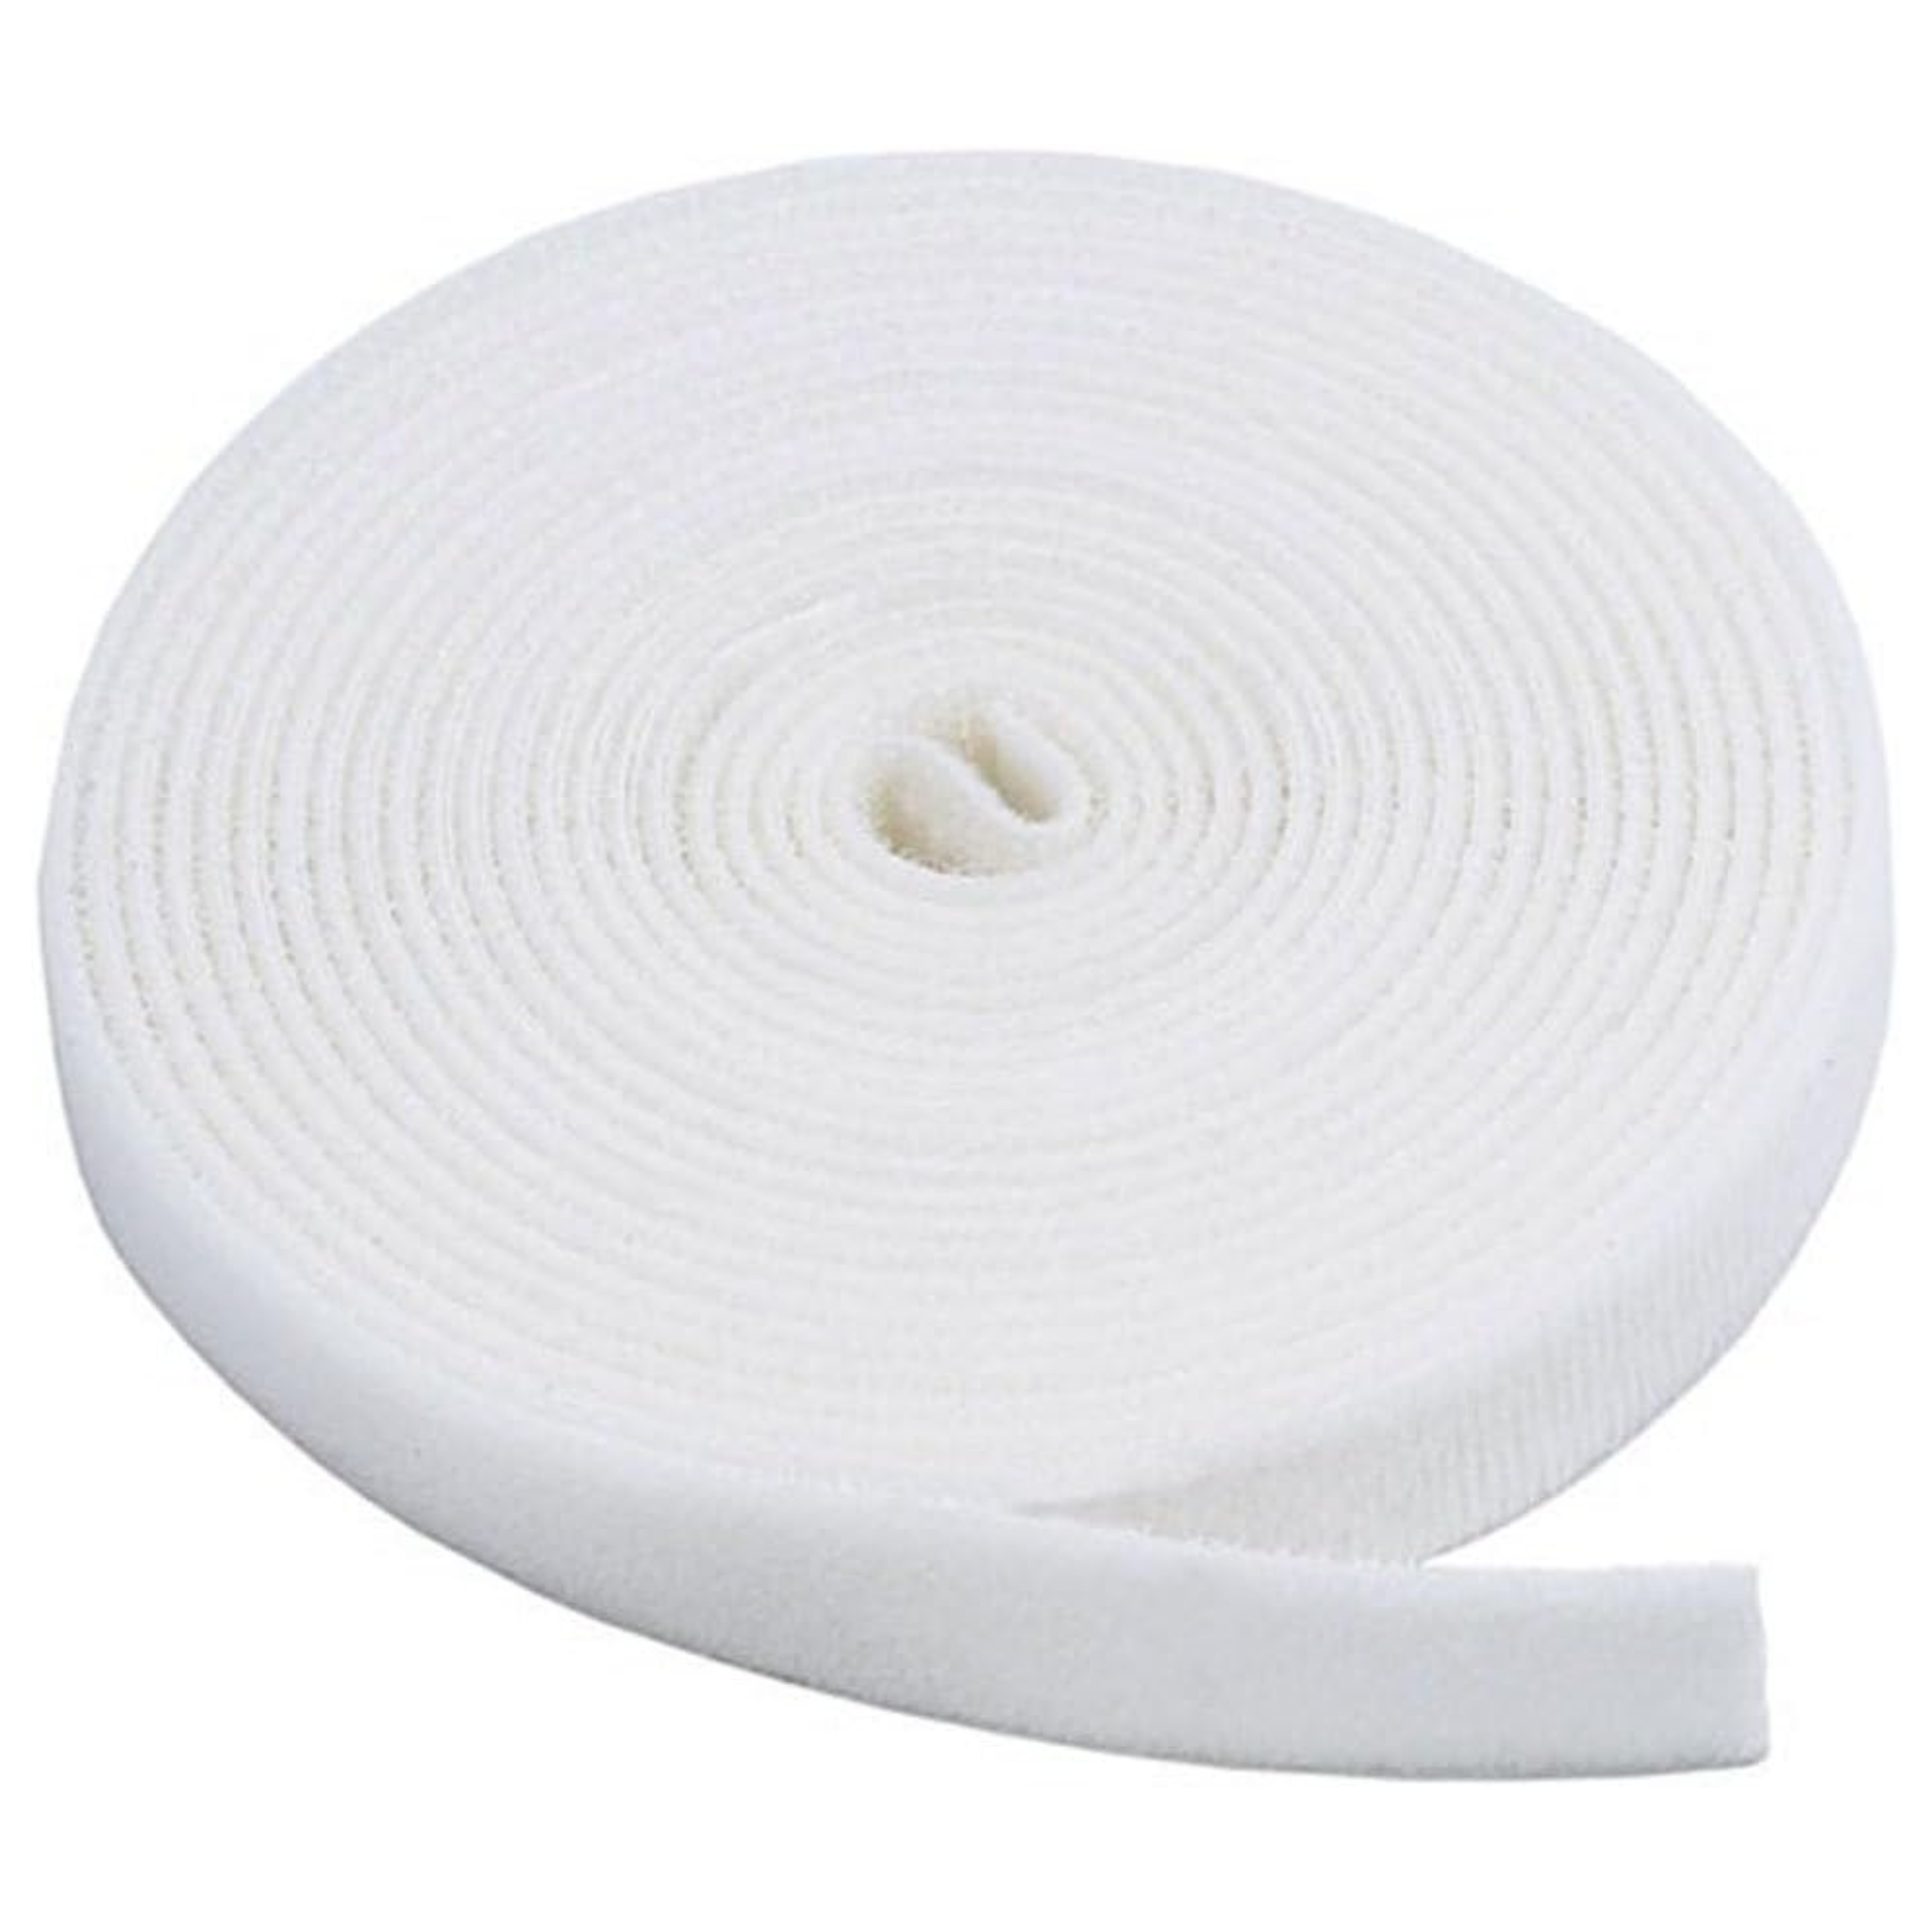 Monoprice Hook and Loop Fastening Tape - 5 Yards Per Roll, 0.75in, White